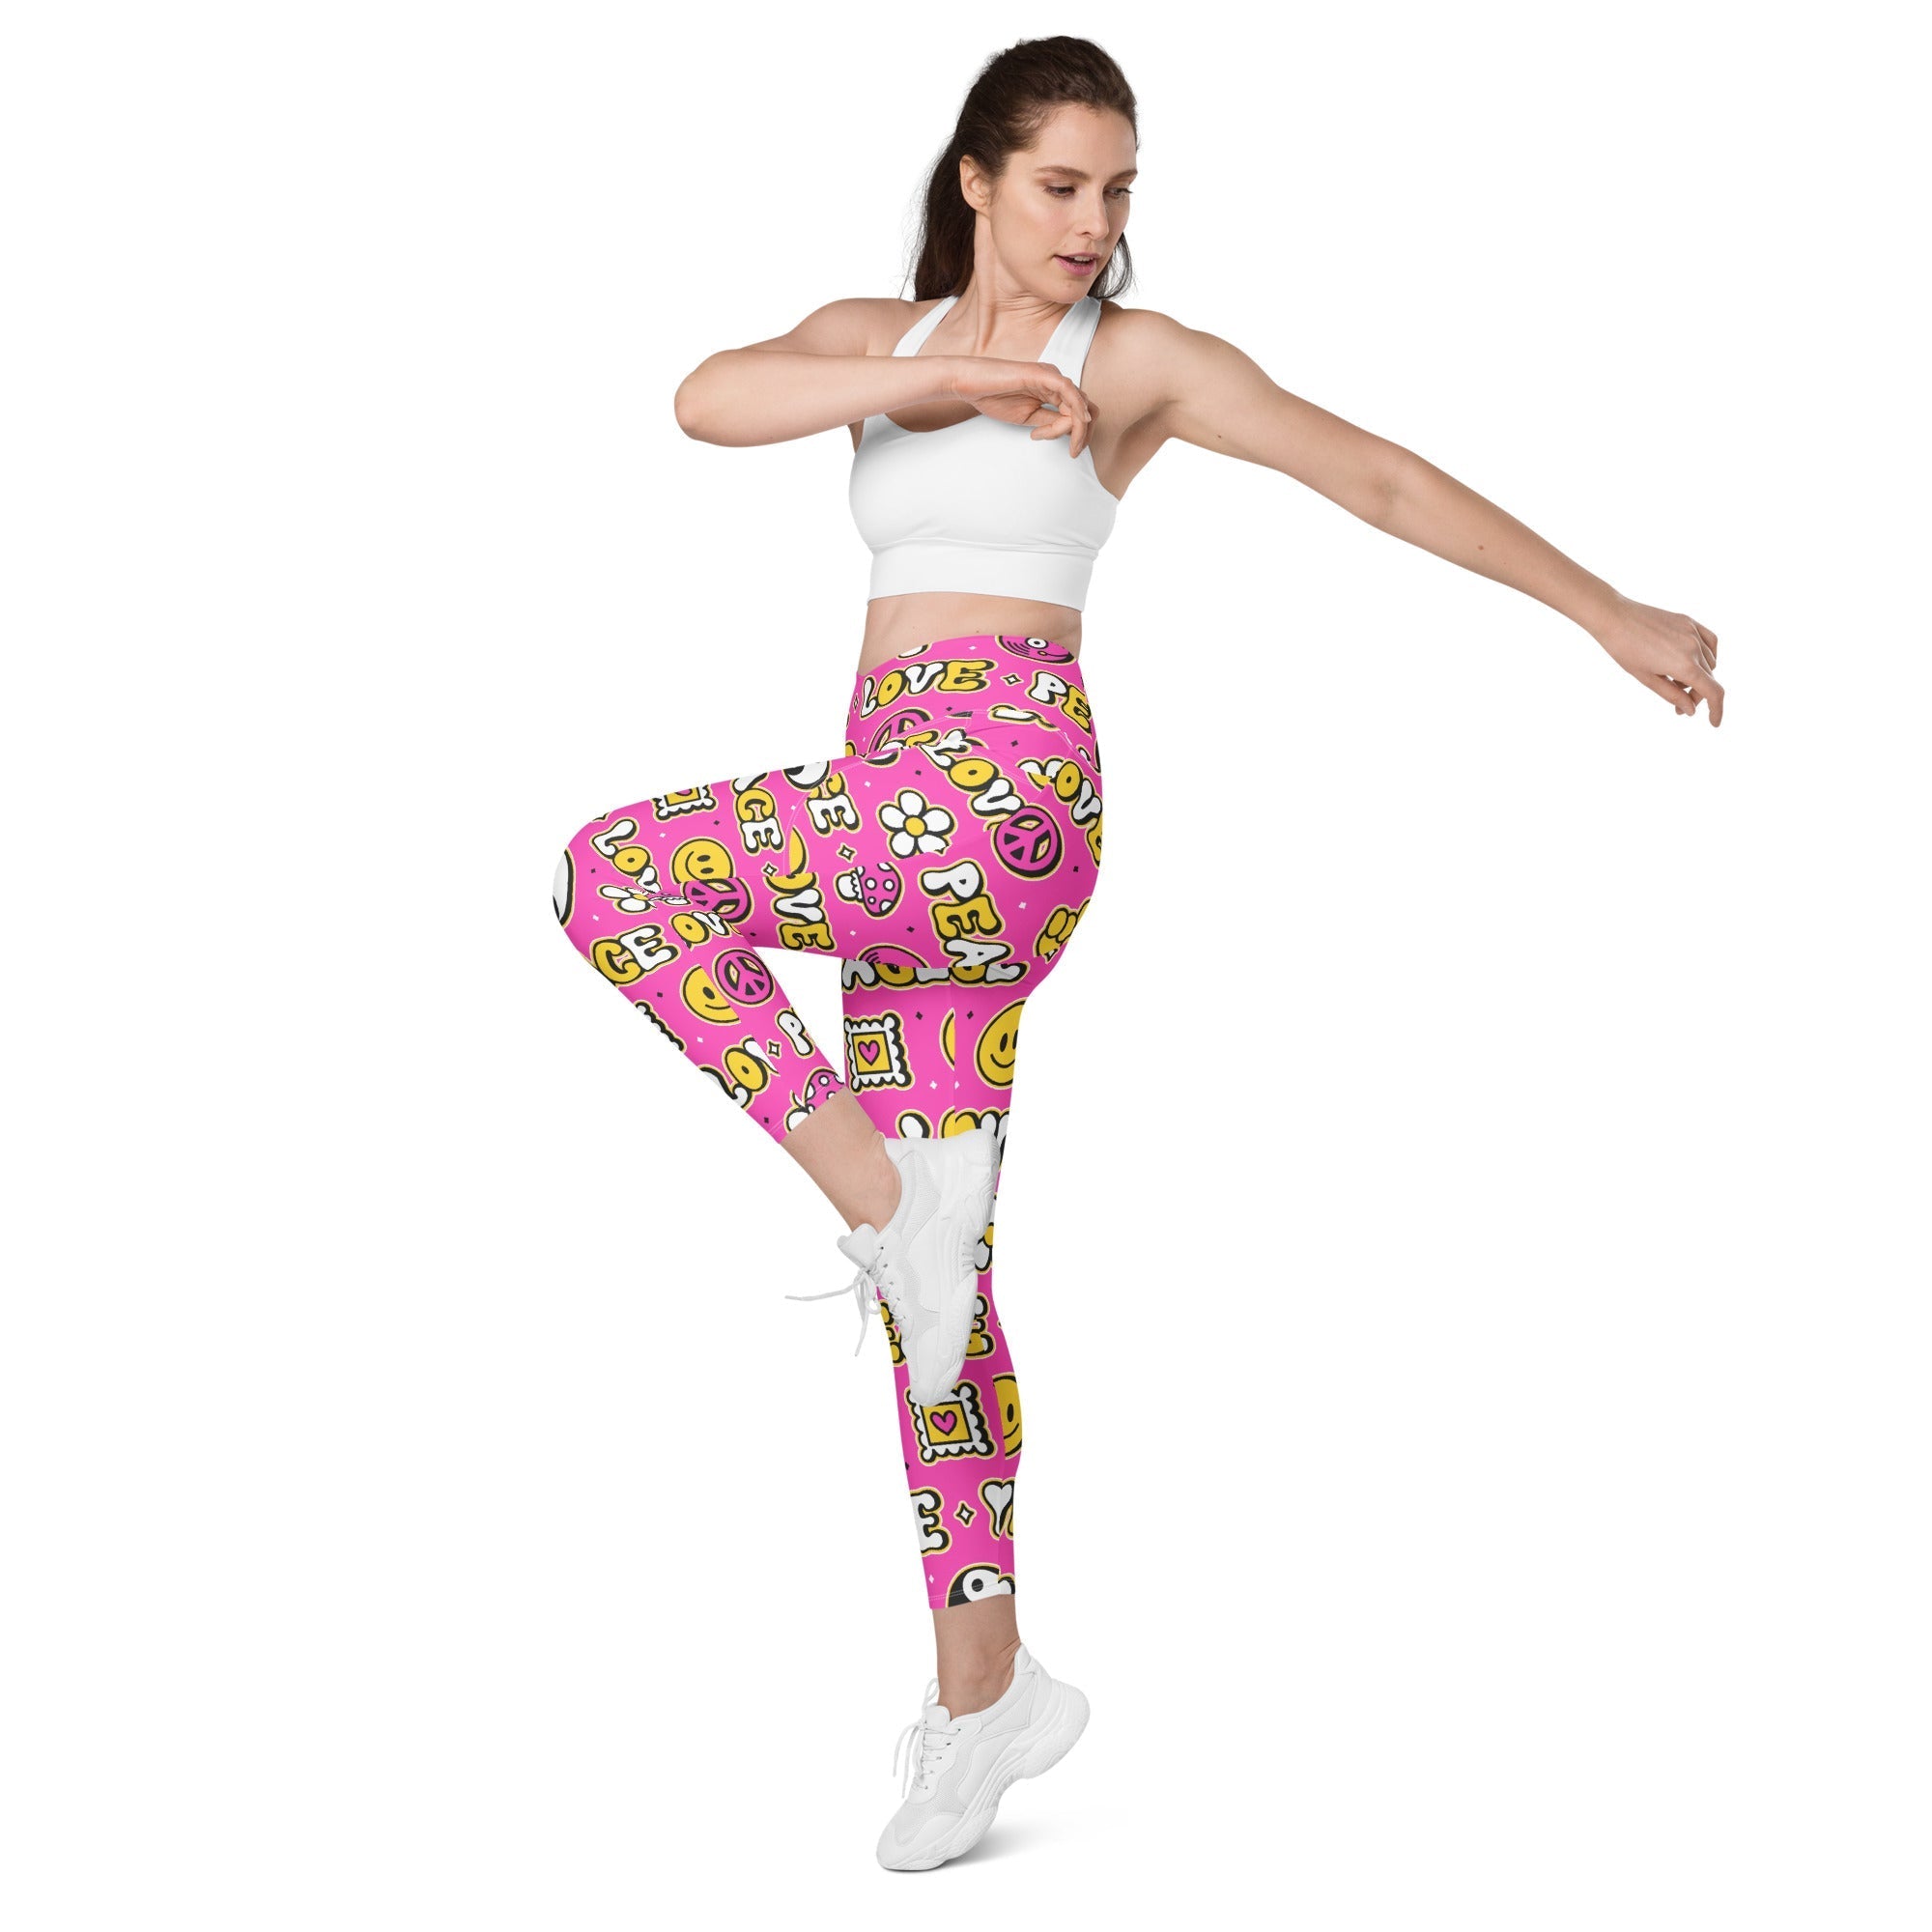 Peace and Love Crossover Leggings With Pockets